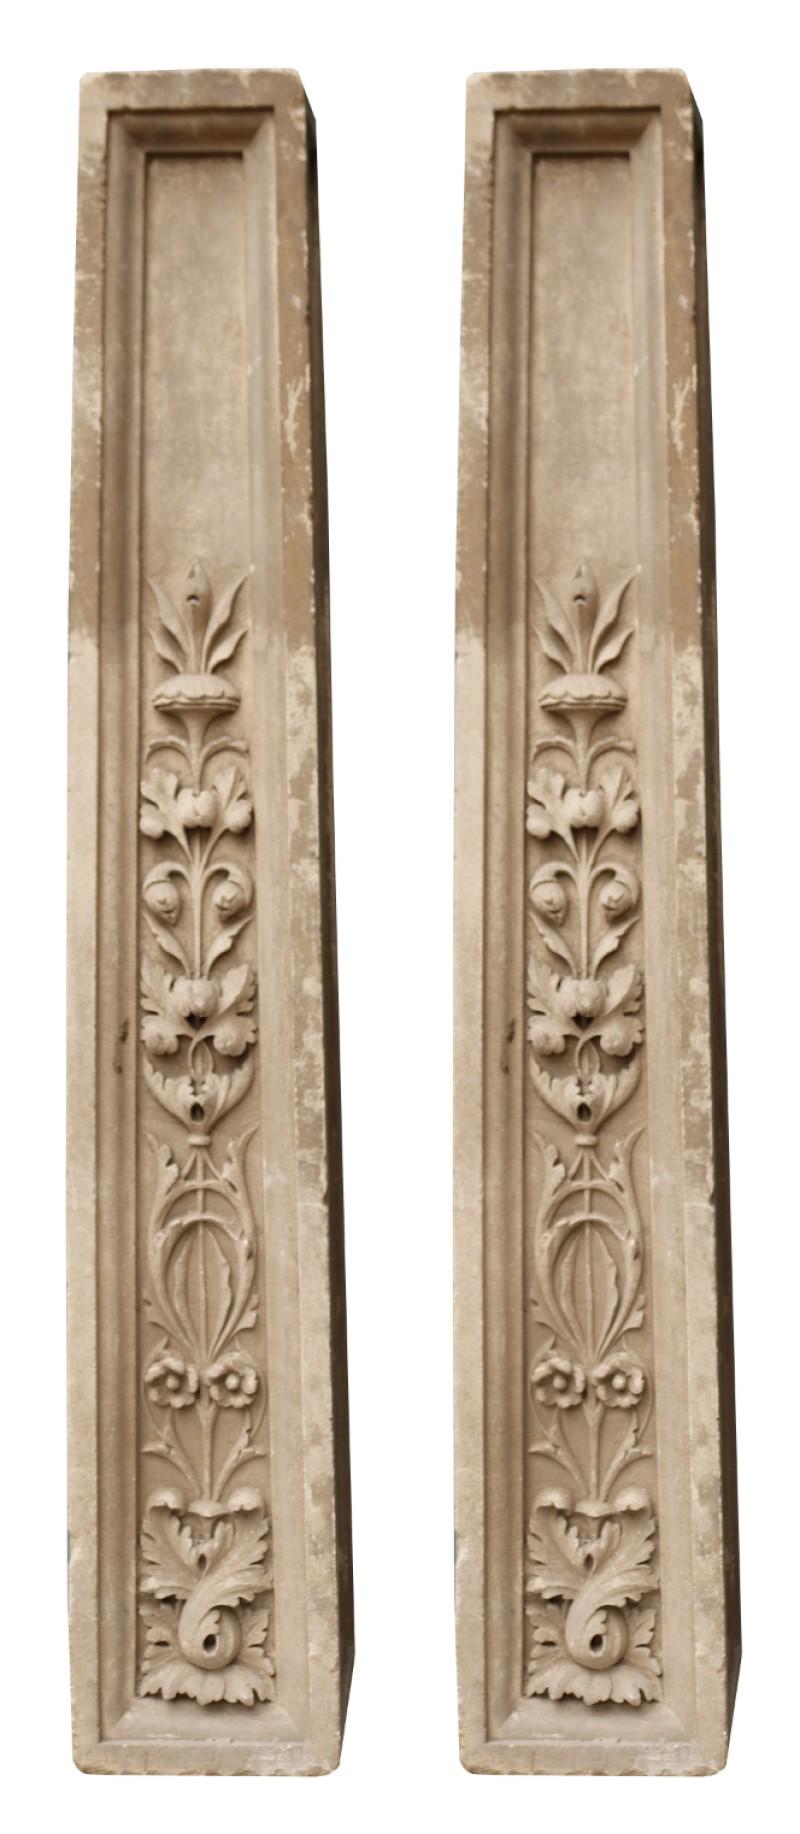 Pair of antique carved limestone pedestals. Four sided pedestals, with three sides adorned with carved foliage and flowers. The back is plain.

Additional dimensions

Width of base 19.5 x 19.5 cm.